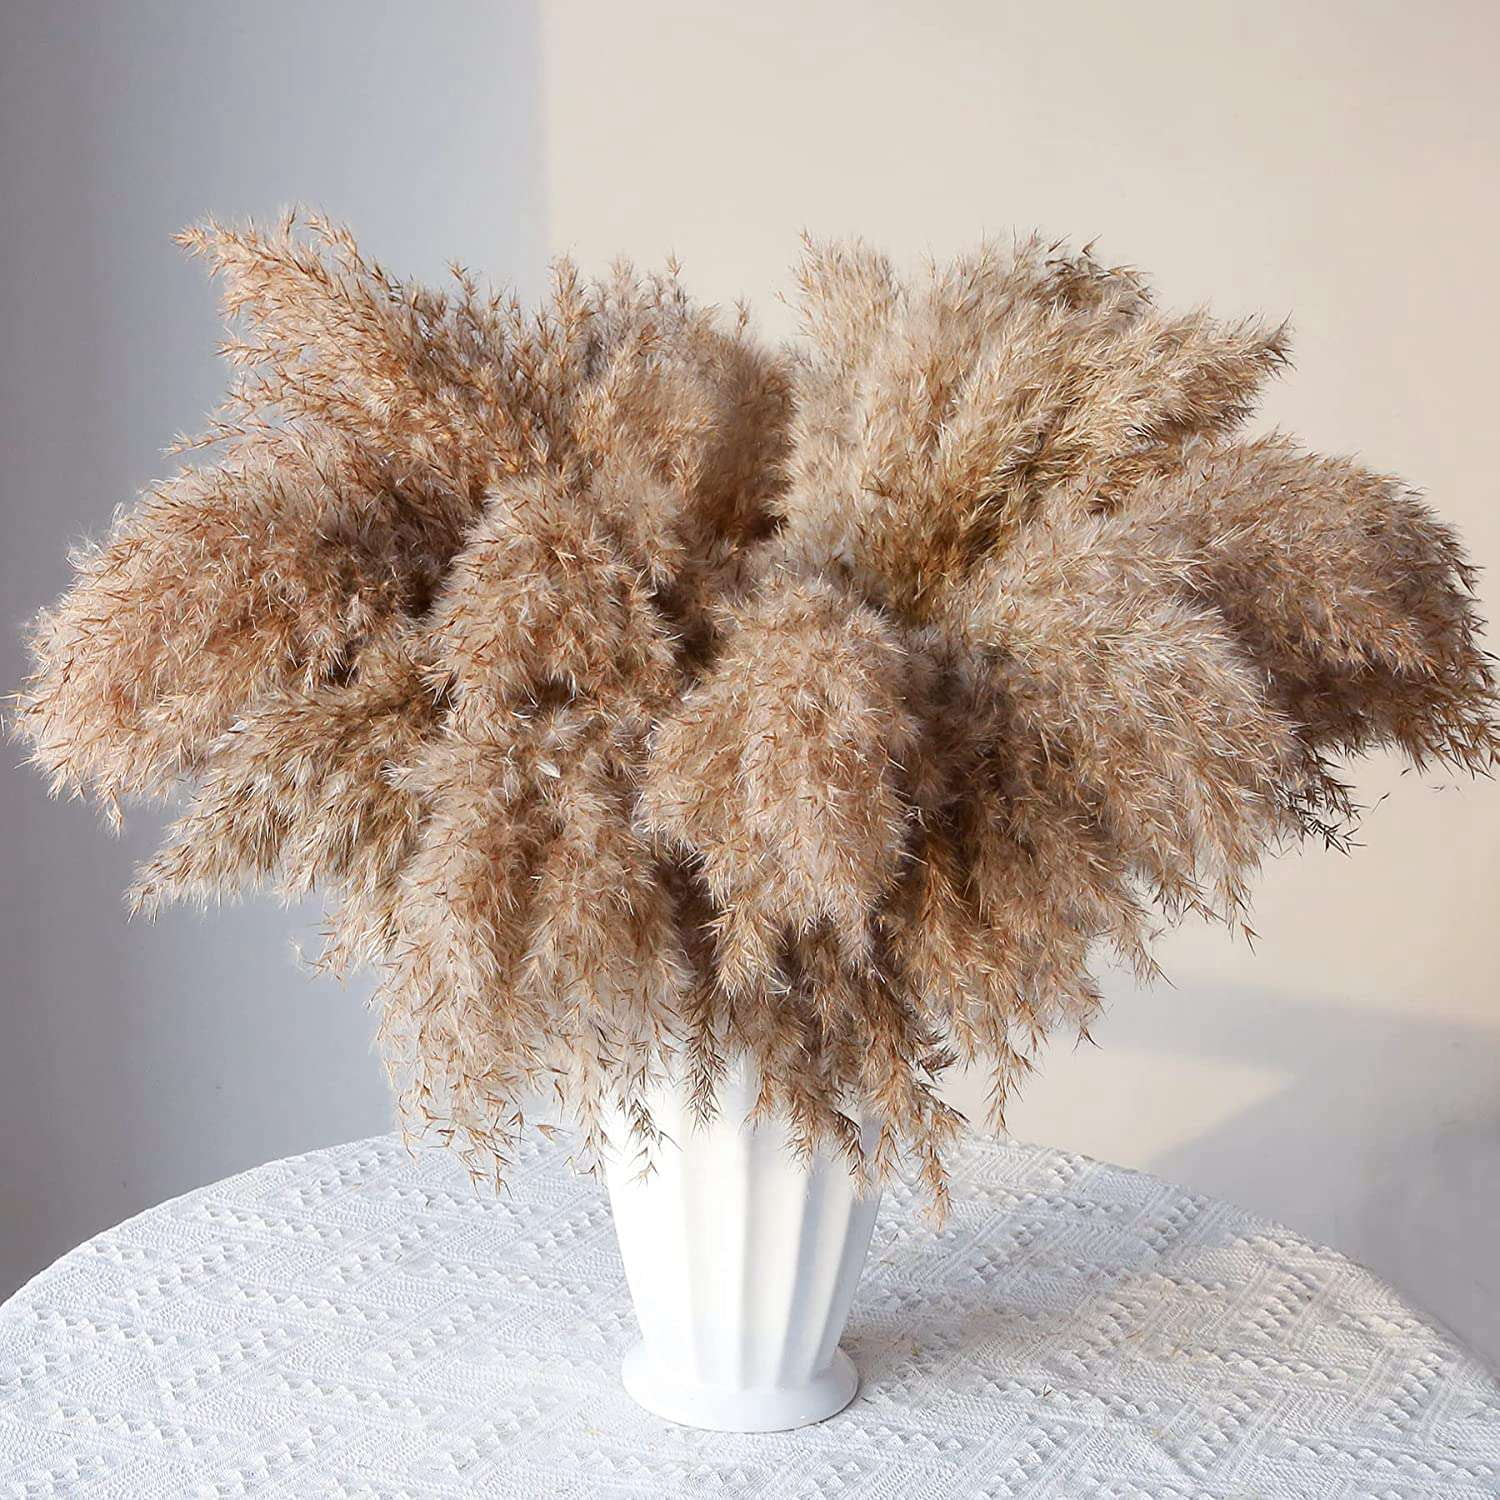 30 Natural Black Pampas Grass Stems 17 Inch Dried Fluffy Small Flowers For  Home And Wedding Pampas Grass Decor From Gabrielcoo, $16.27